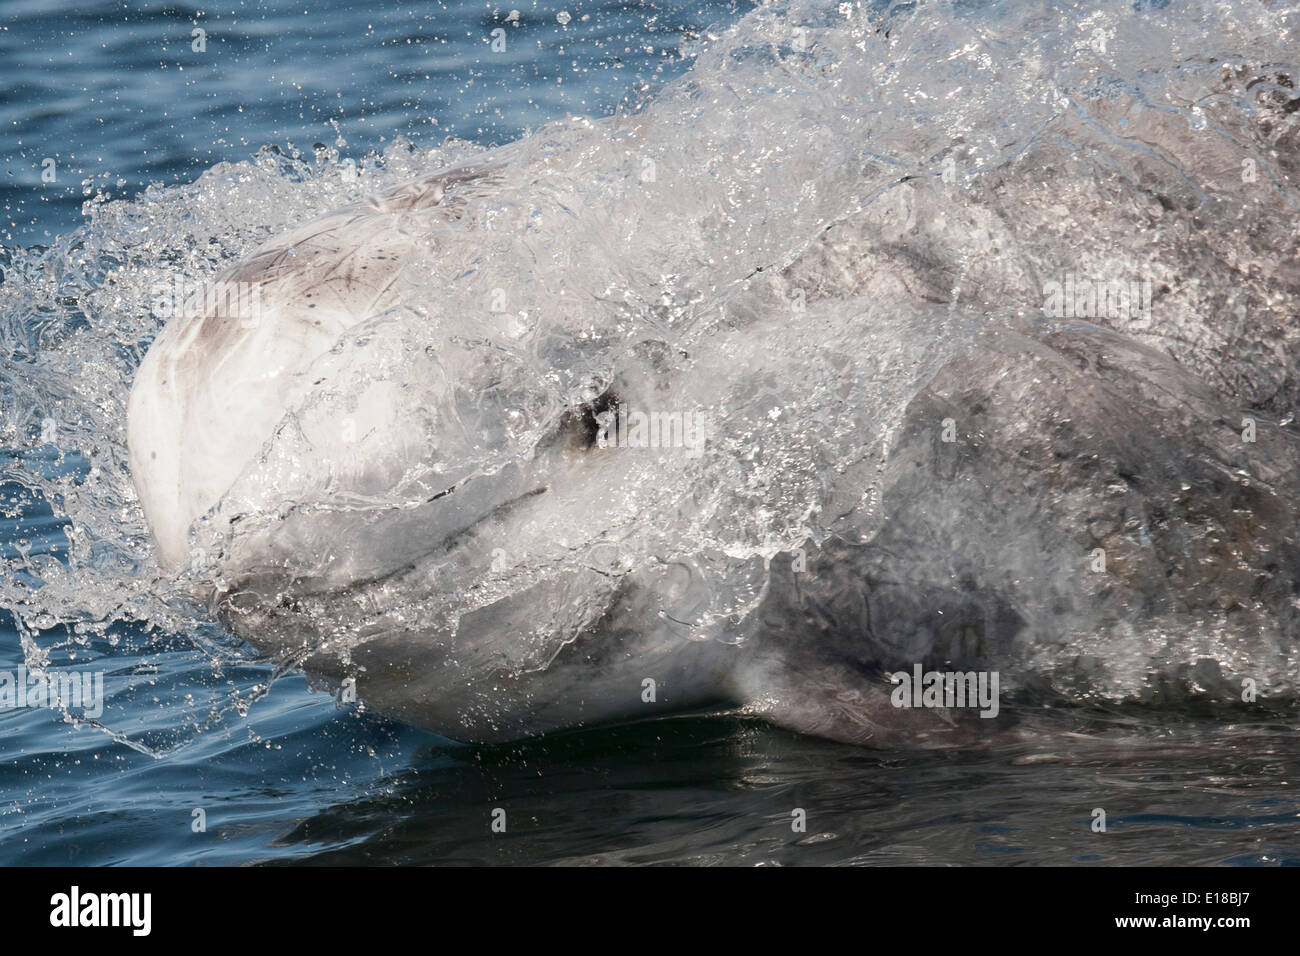 Extreme close up of a Risso's Dolphin (Grampus griseus) surfacing. Monterey, California, Pacific Ocean. Stock Photo